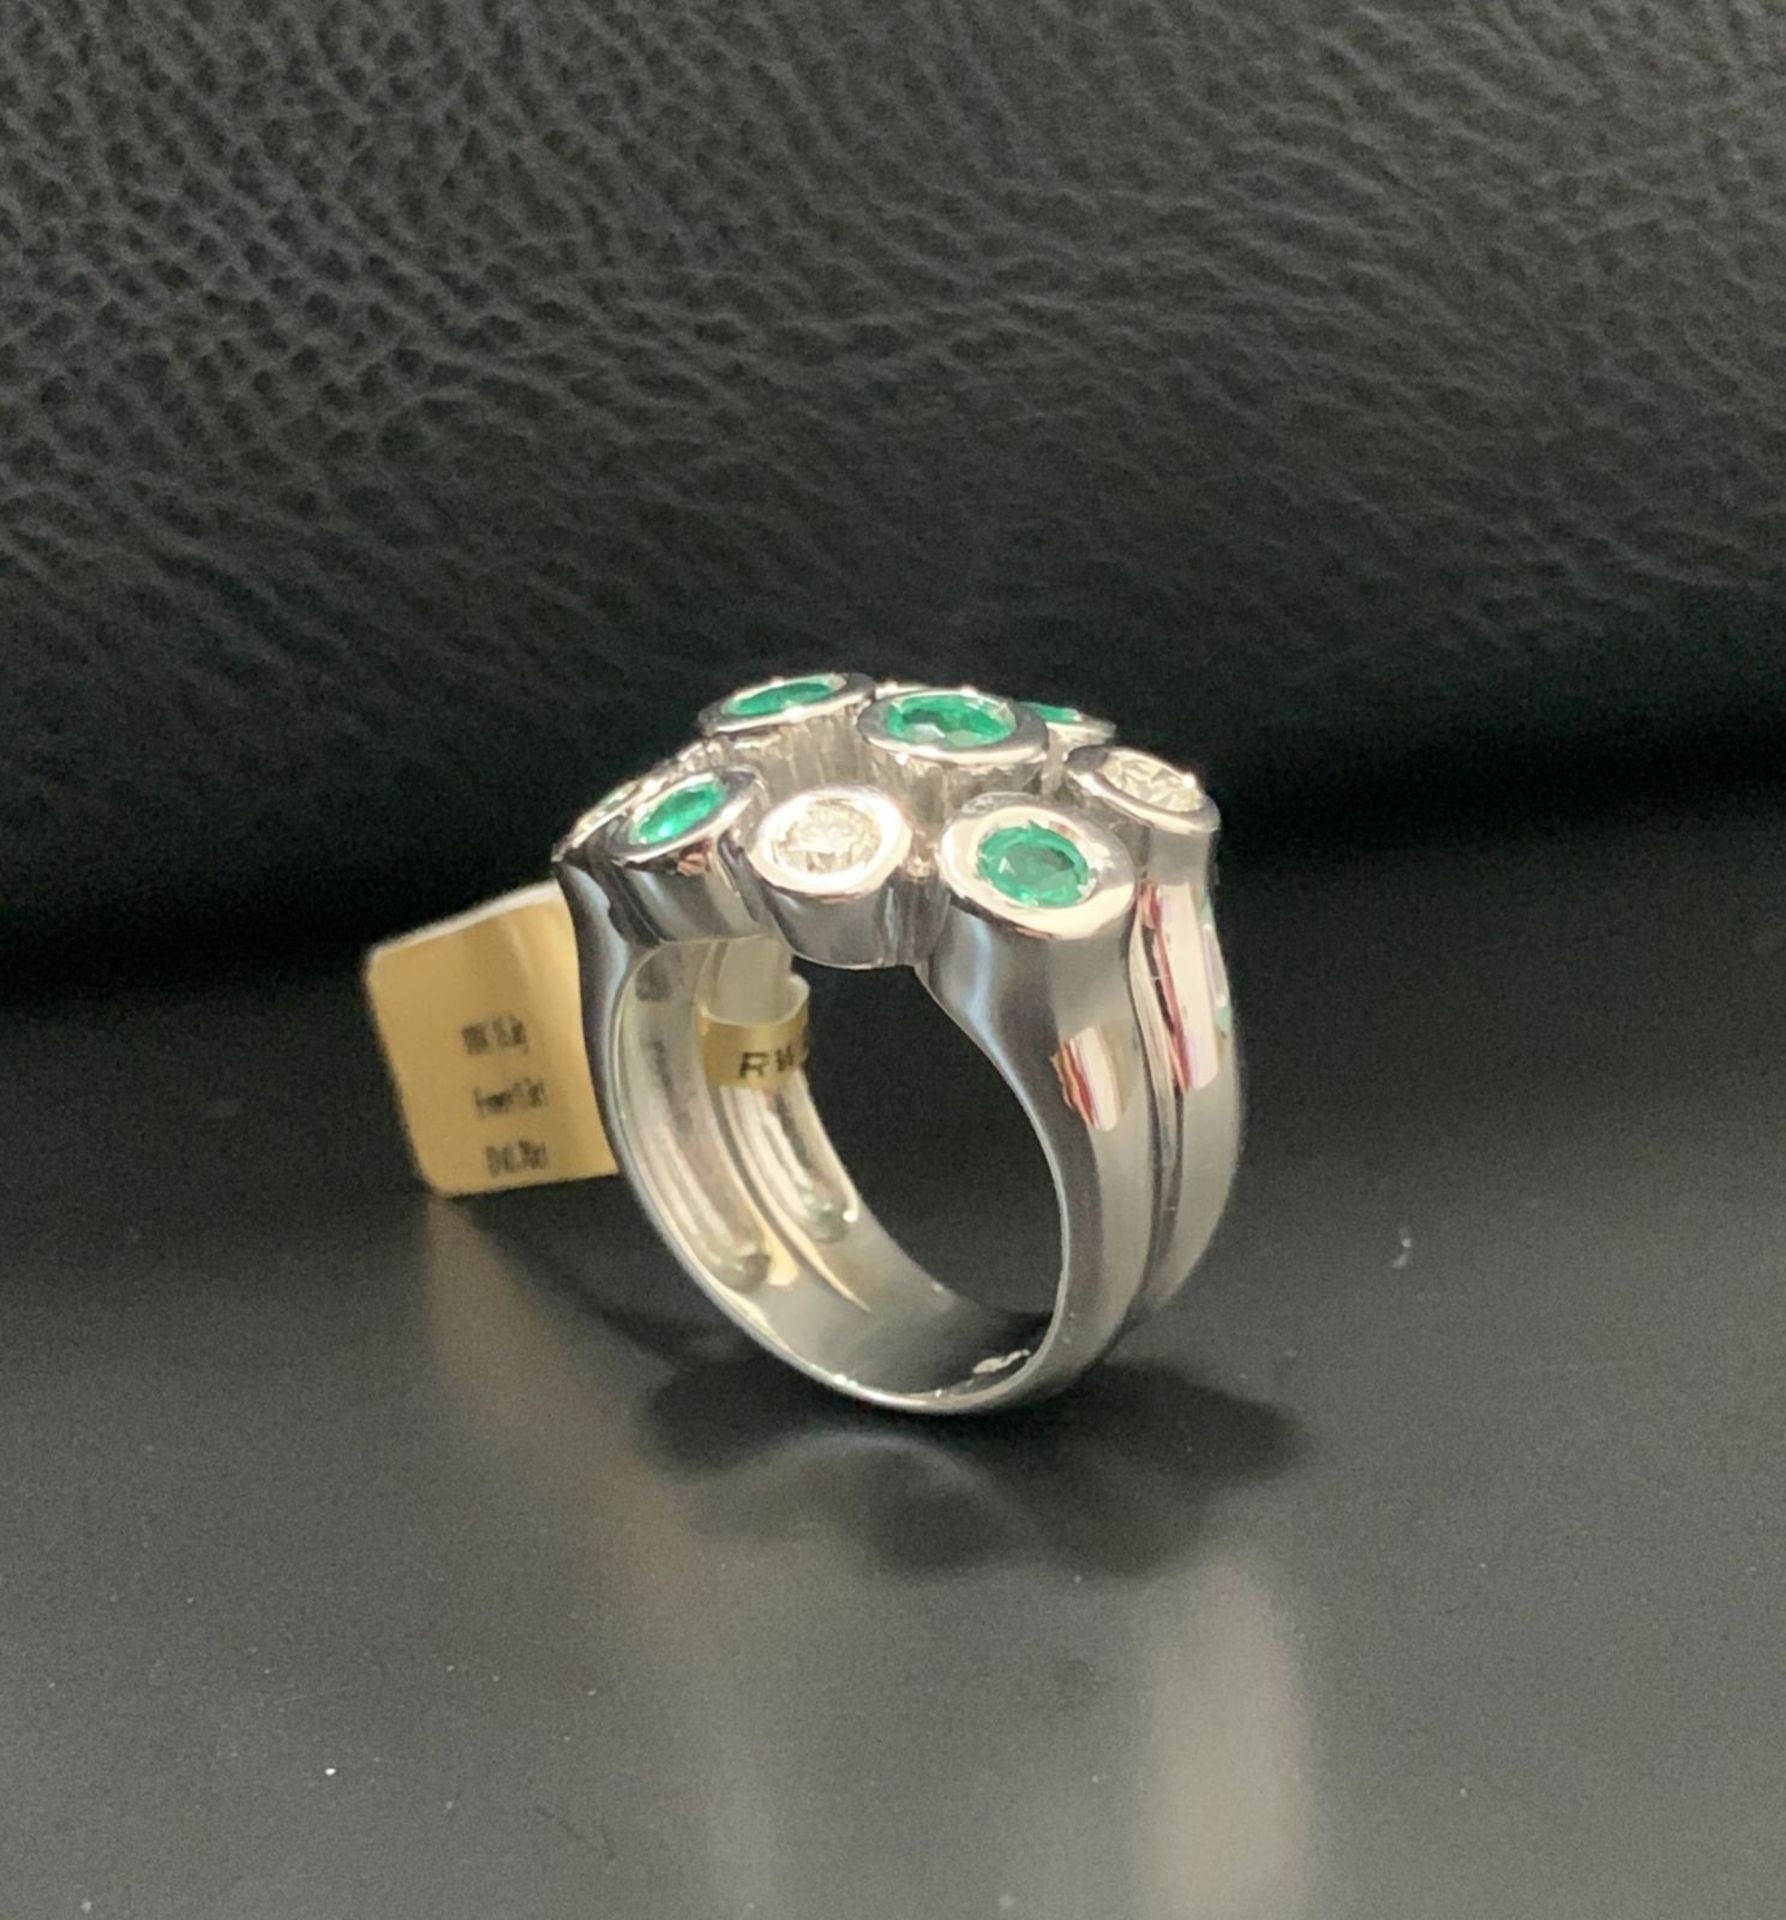 2.00CT EMERALD & DIAMOND RING - SET IN 18K GOLD (15.3g Total Weight) - Image 2 of 2